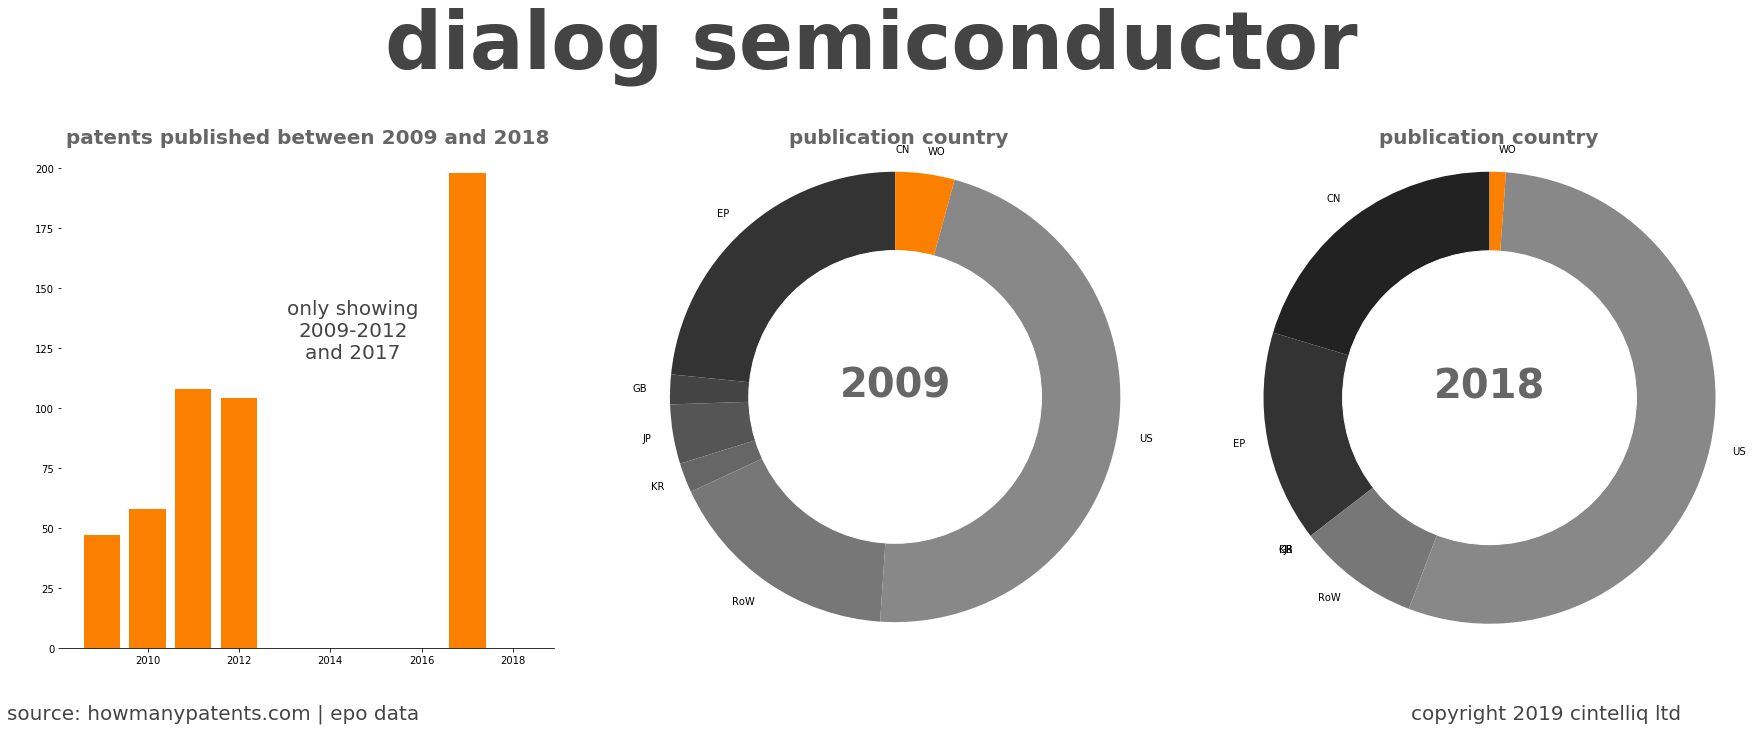 summary of patents for Dialog Semiconductor